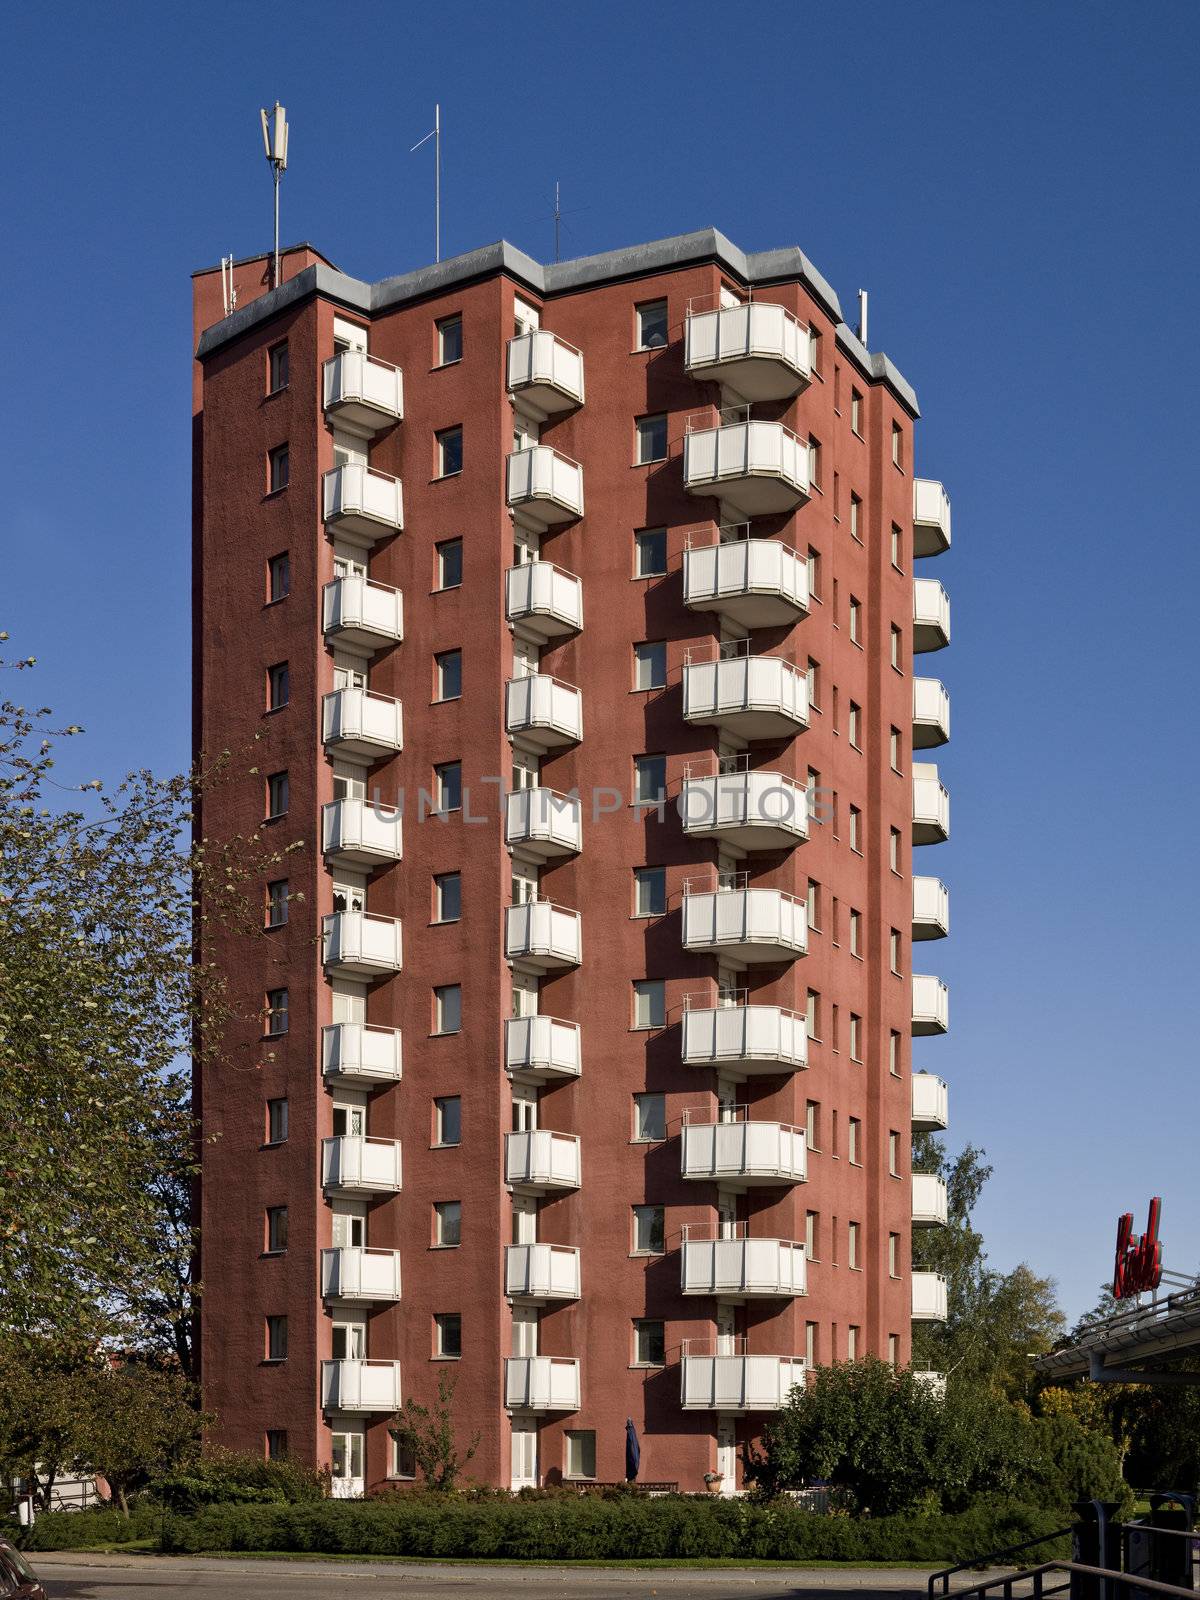 A light red apartment complex against a blue sky